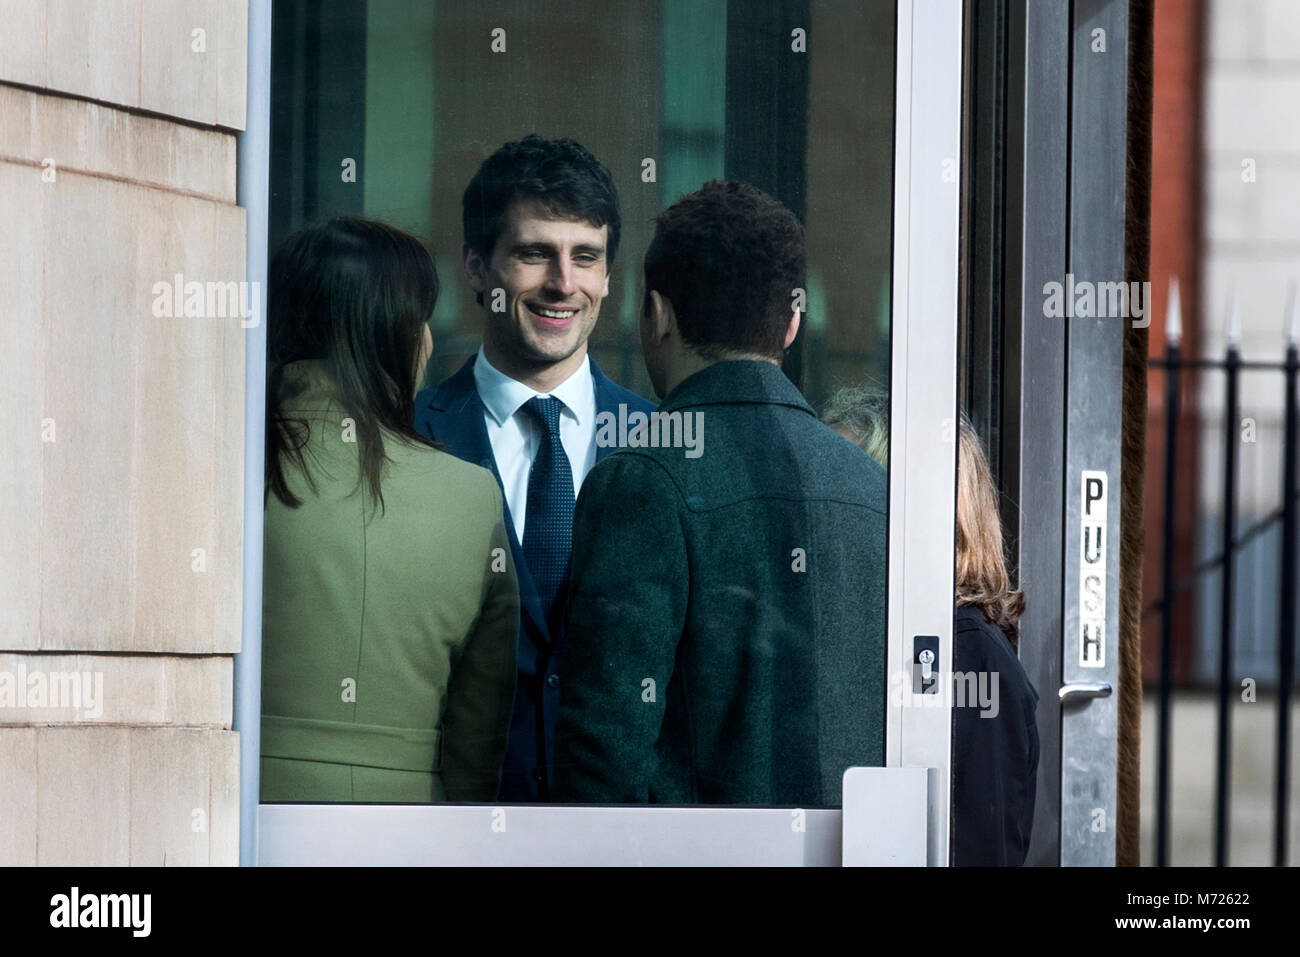 Blane McIlroy (centre) interacts with Ireland and Ulster rugby player Paddy Jackson (right) as they meet while queuing to enter Belfast Crown Court, where Mr McIlroy is on trial accused of one count of exposure, and Mr Jackson with his teammate Stuart Olding are on trial accused of raping a woman at a property in south Belfast in June 2016. Stock Photo